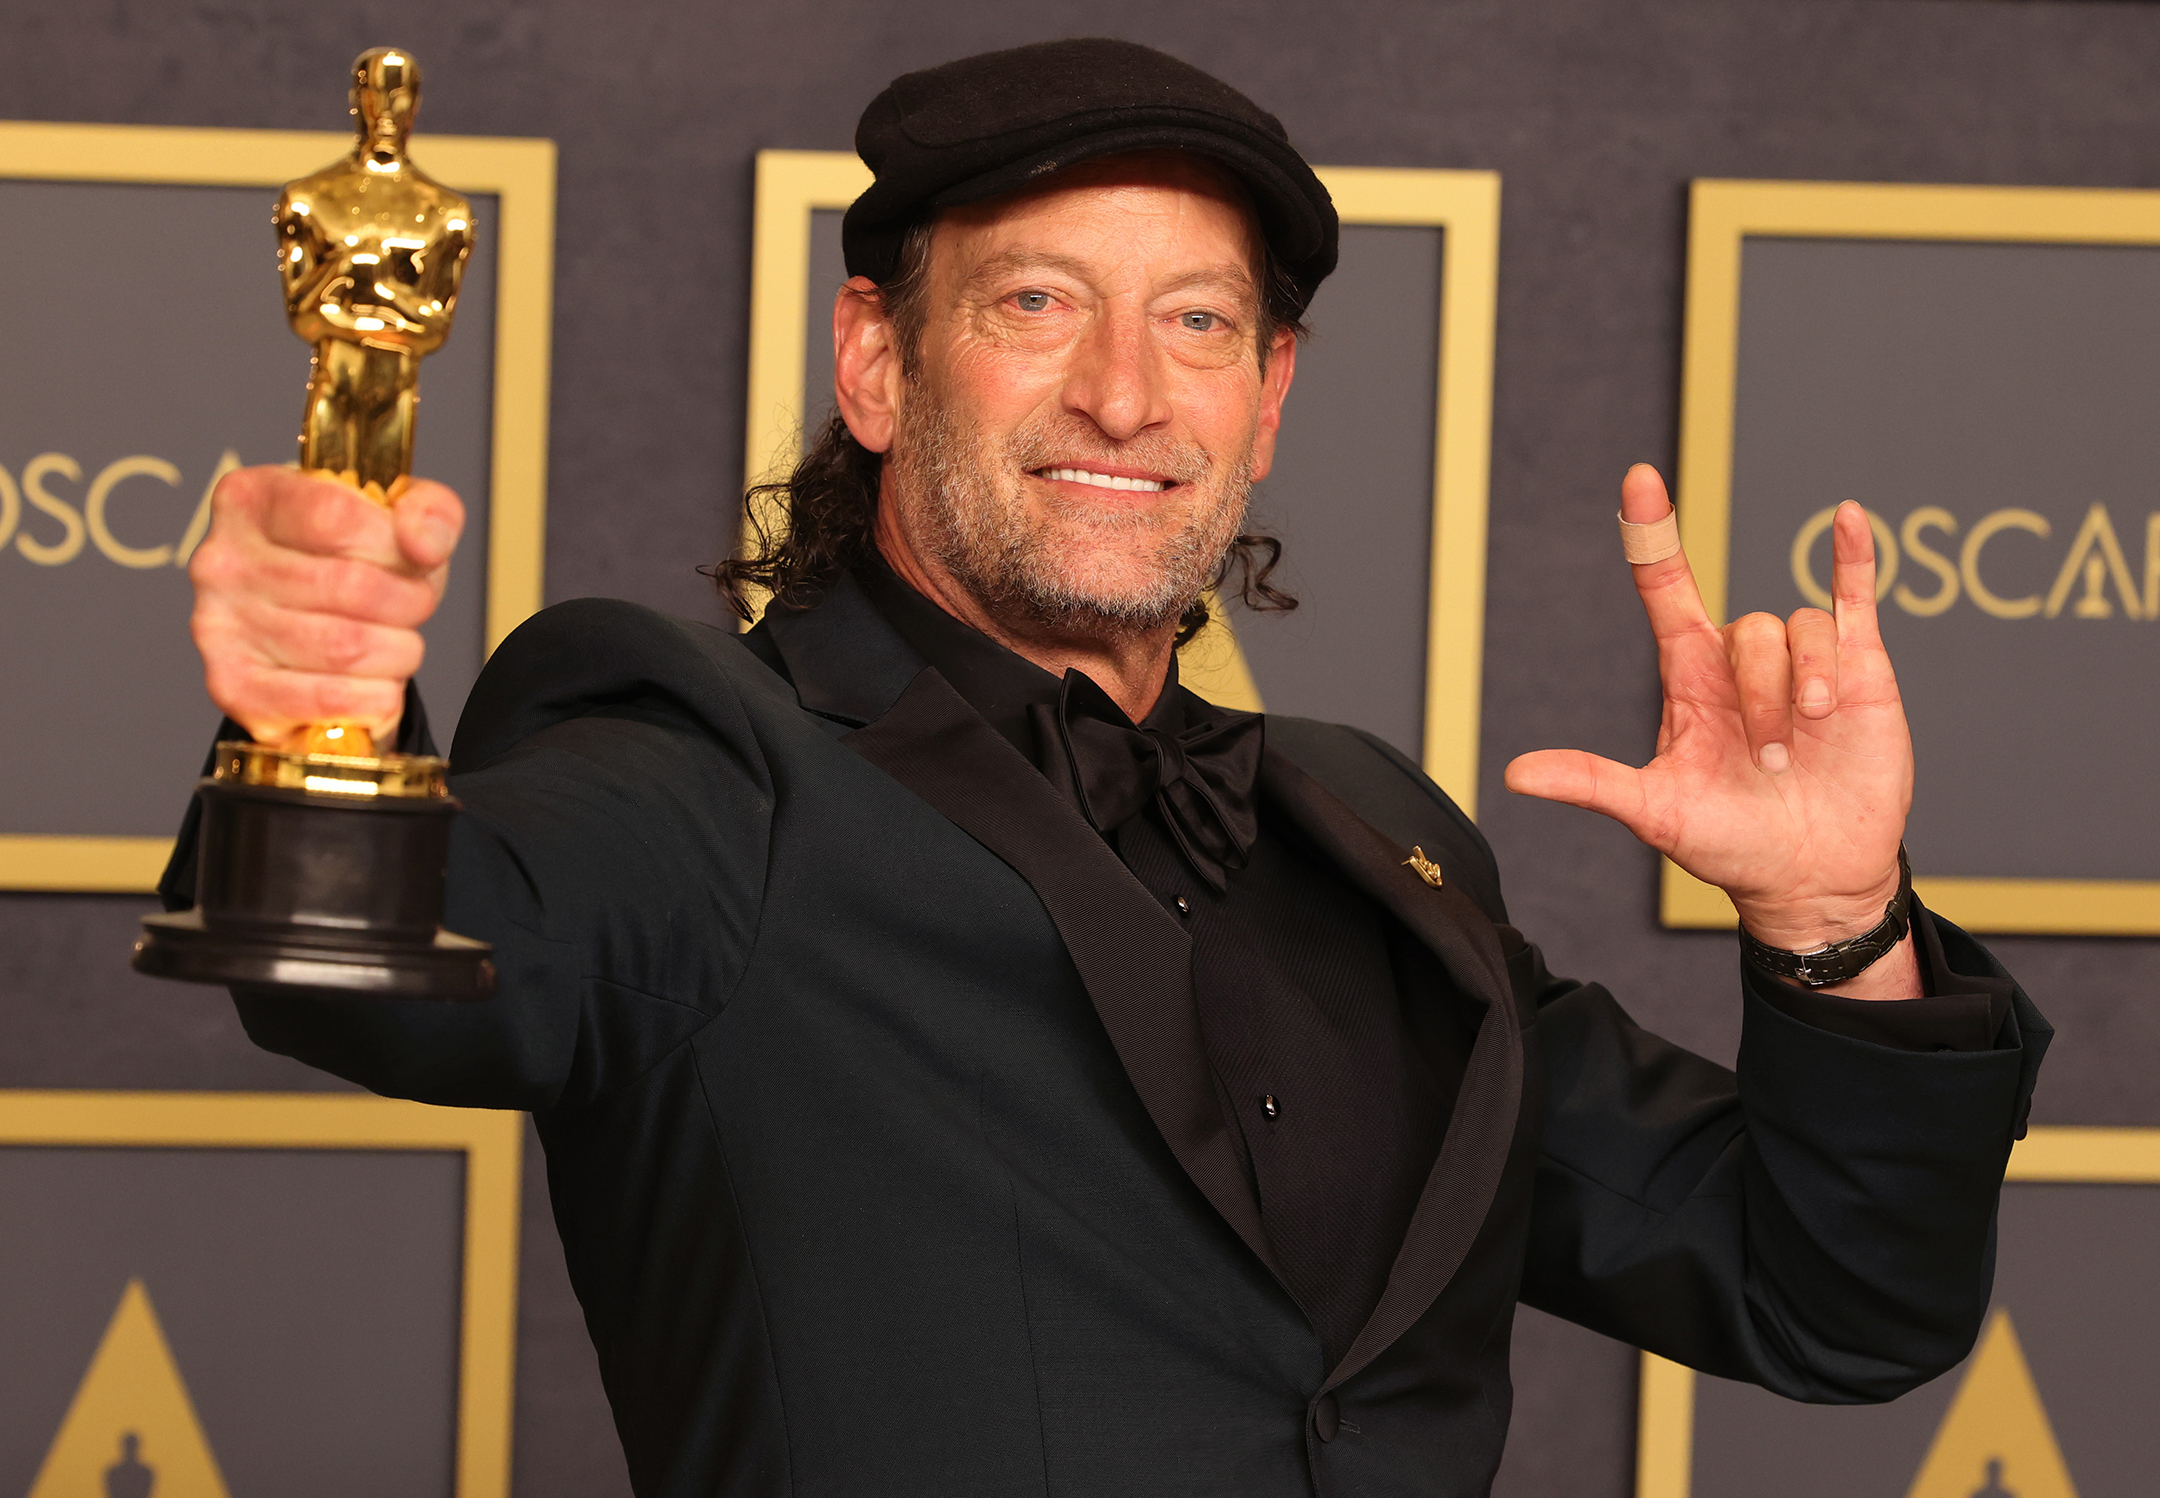 Man holding an academy award trophy poses for the camera